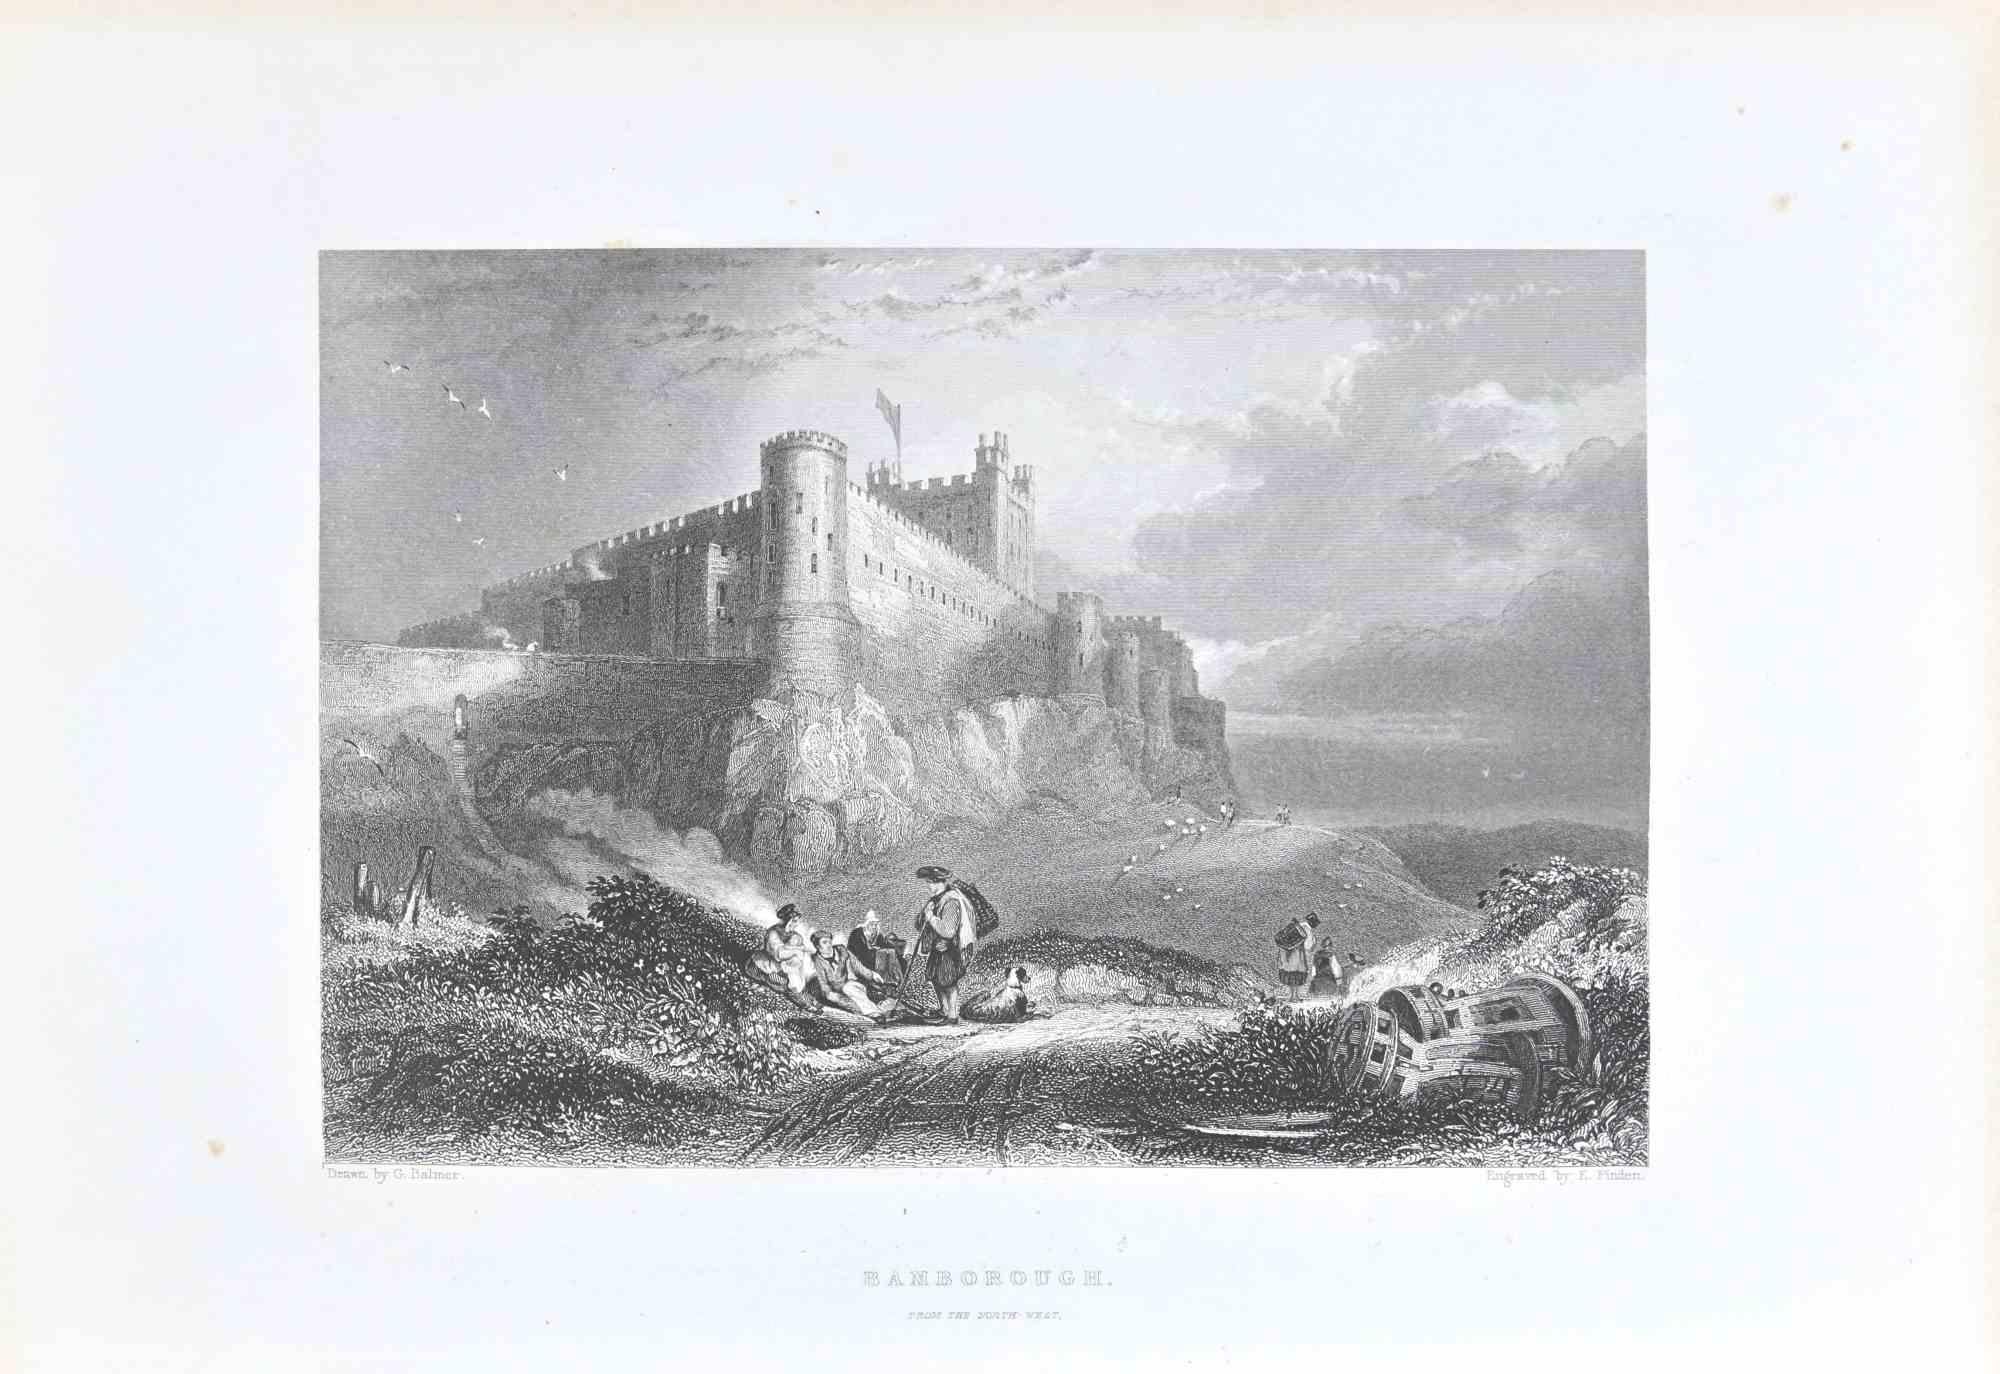 Bamborough (from the North West) is a lithograph artwork on paper realized by the artist George Balmer .

Signed on the plate on the lower left. Titled on the lower center. Engraved by E. Finden

The state of preservation is good, only a yellowed